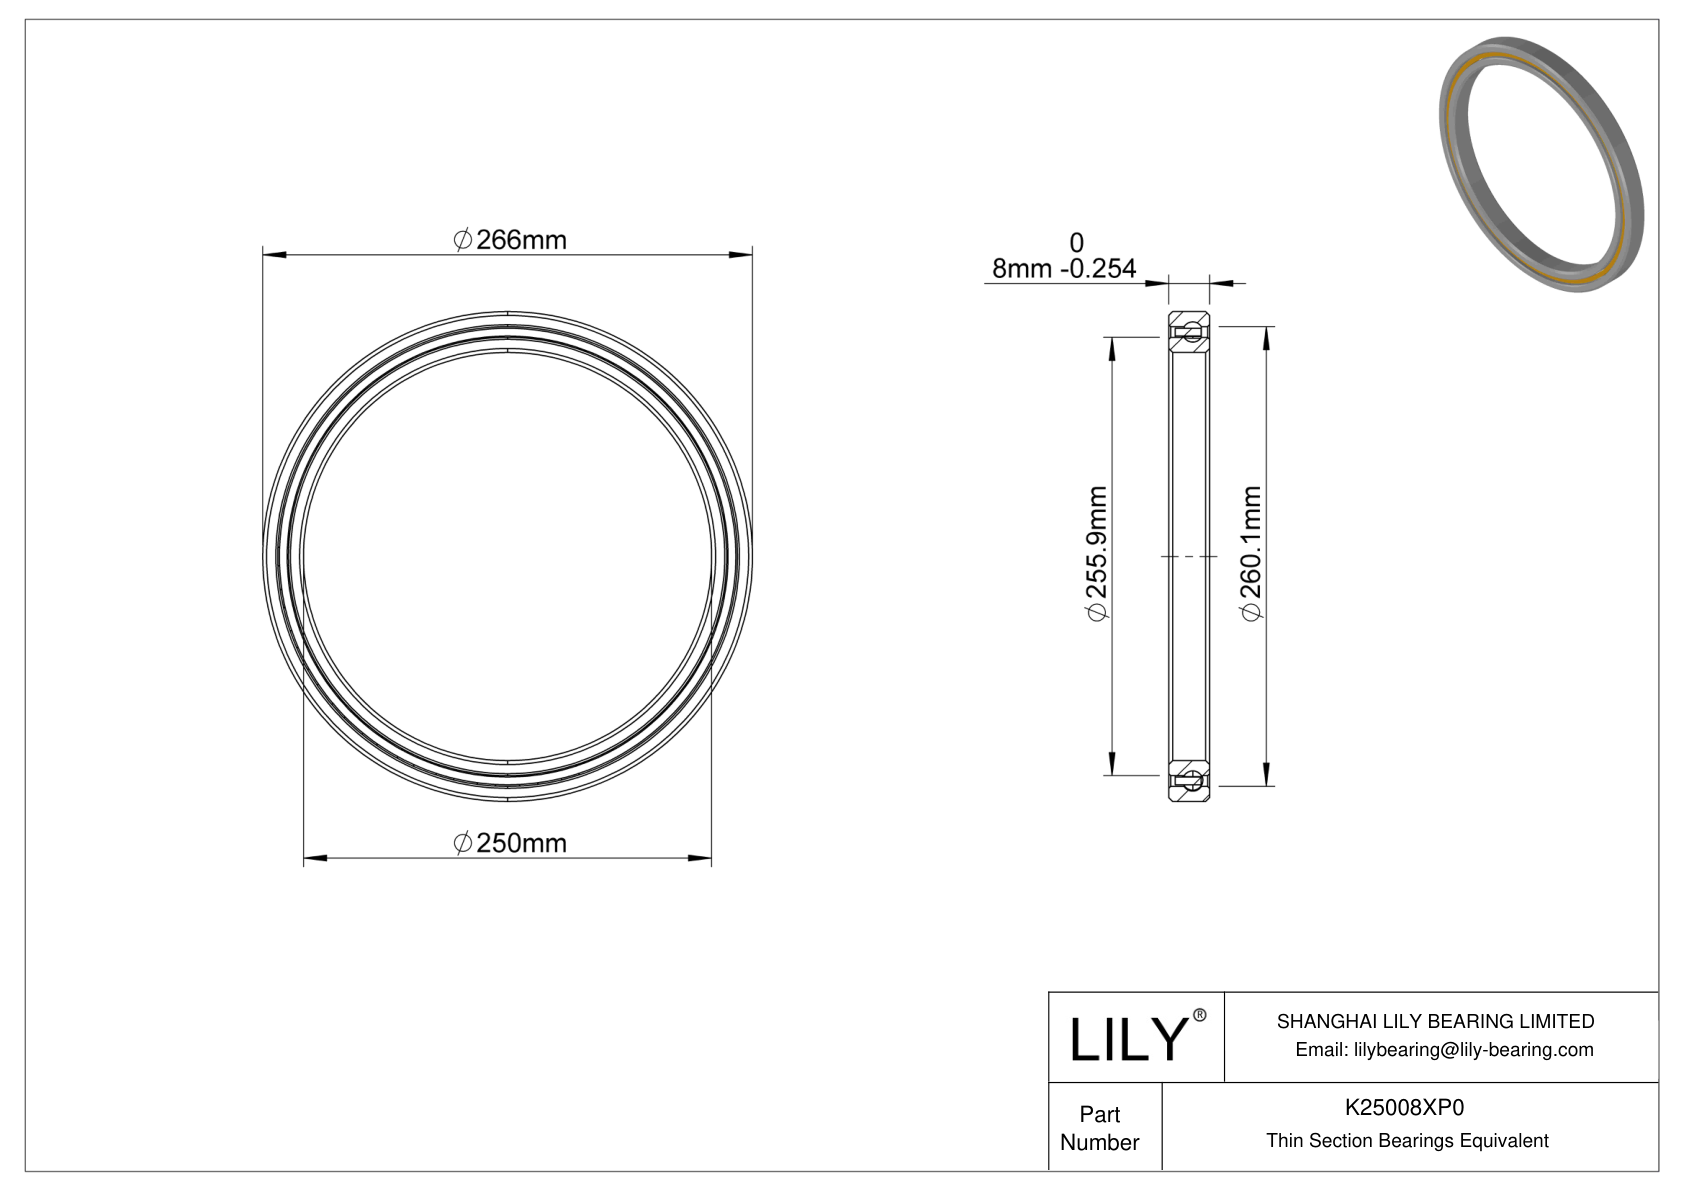 K25008XP0 Constant Section (CS) Bearings cad drawing